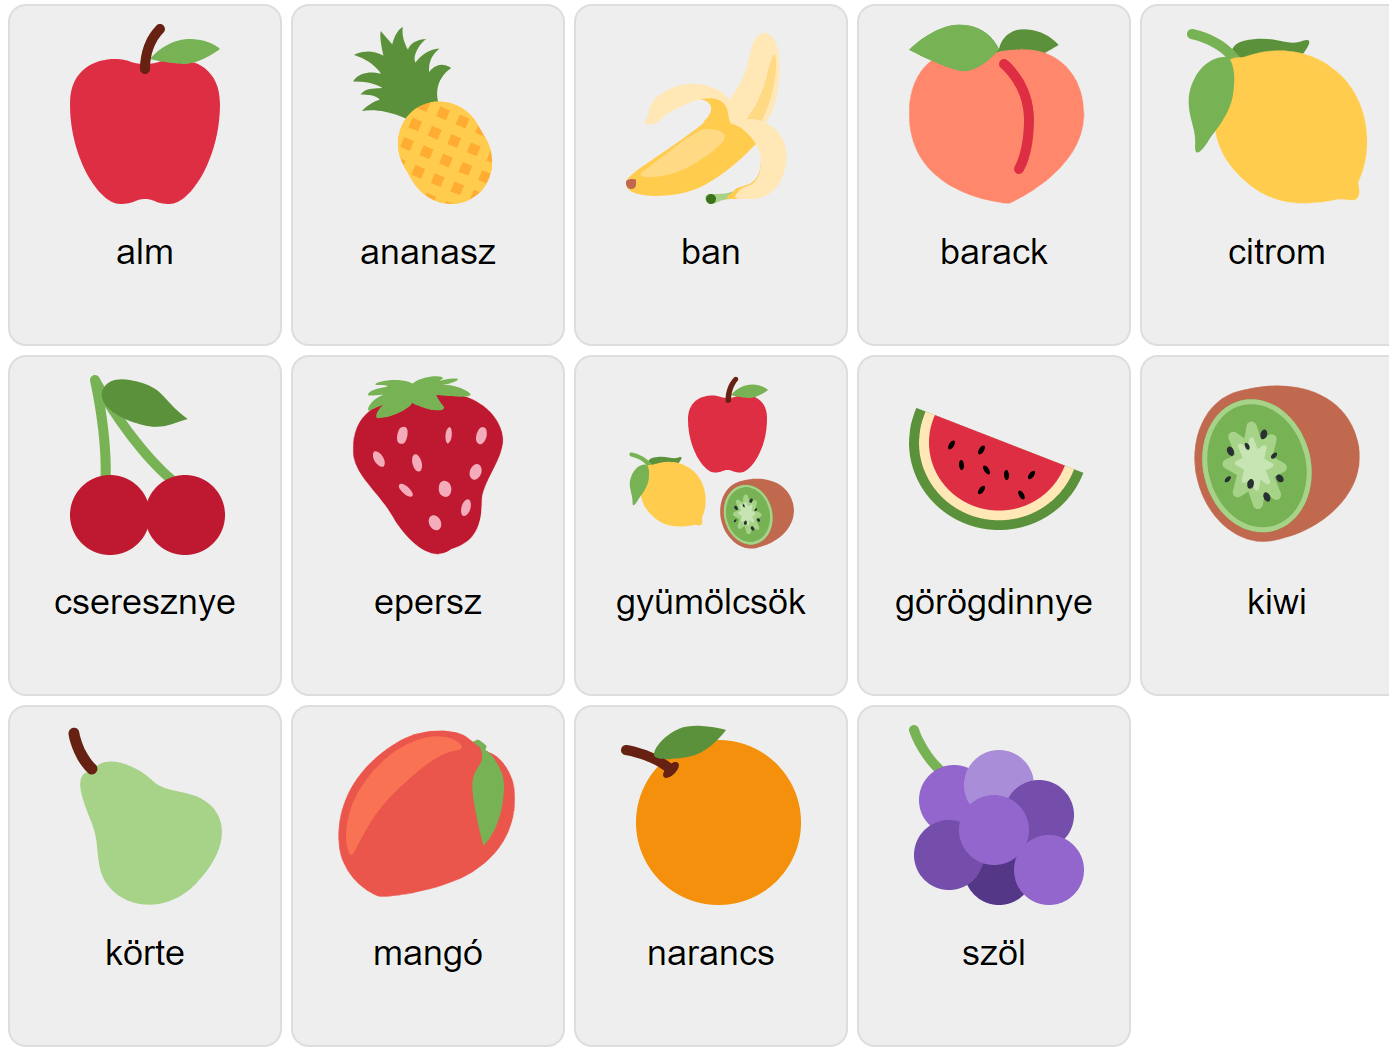 Fruits in Hungarian